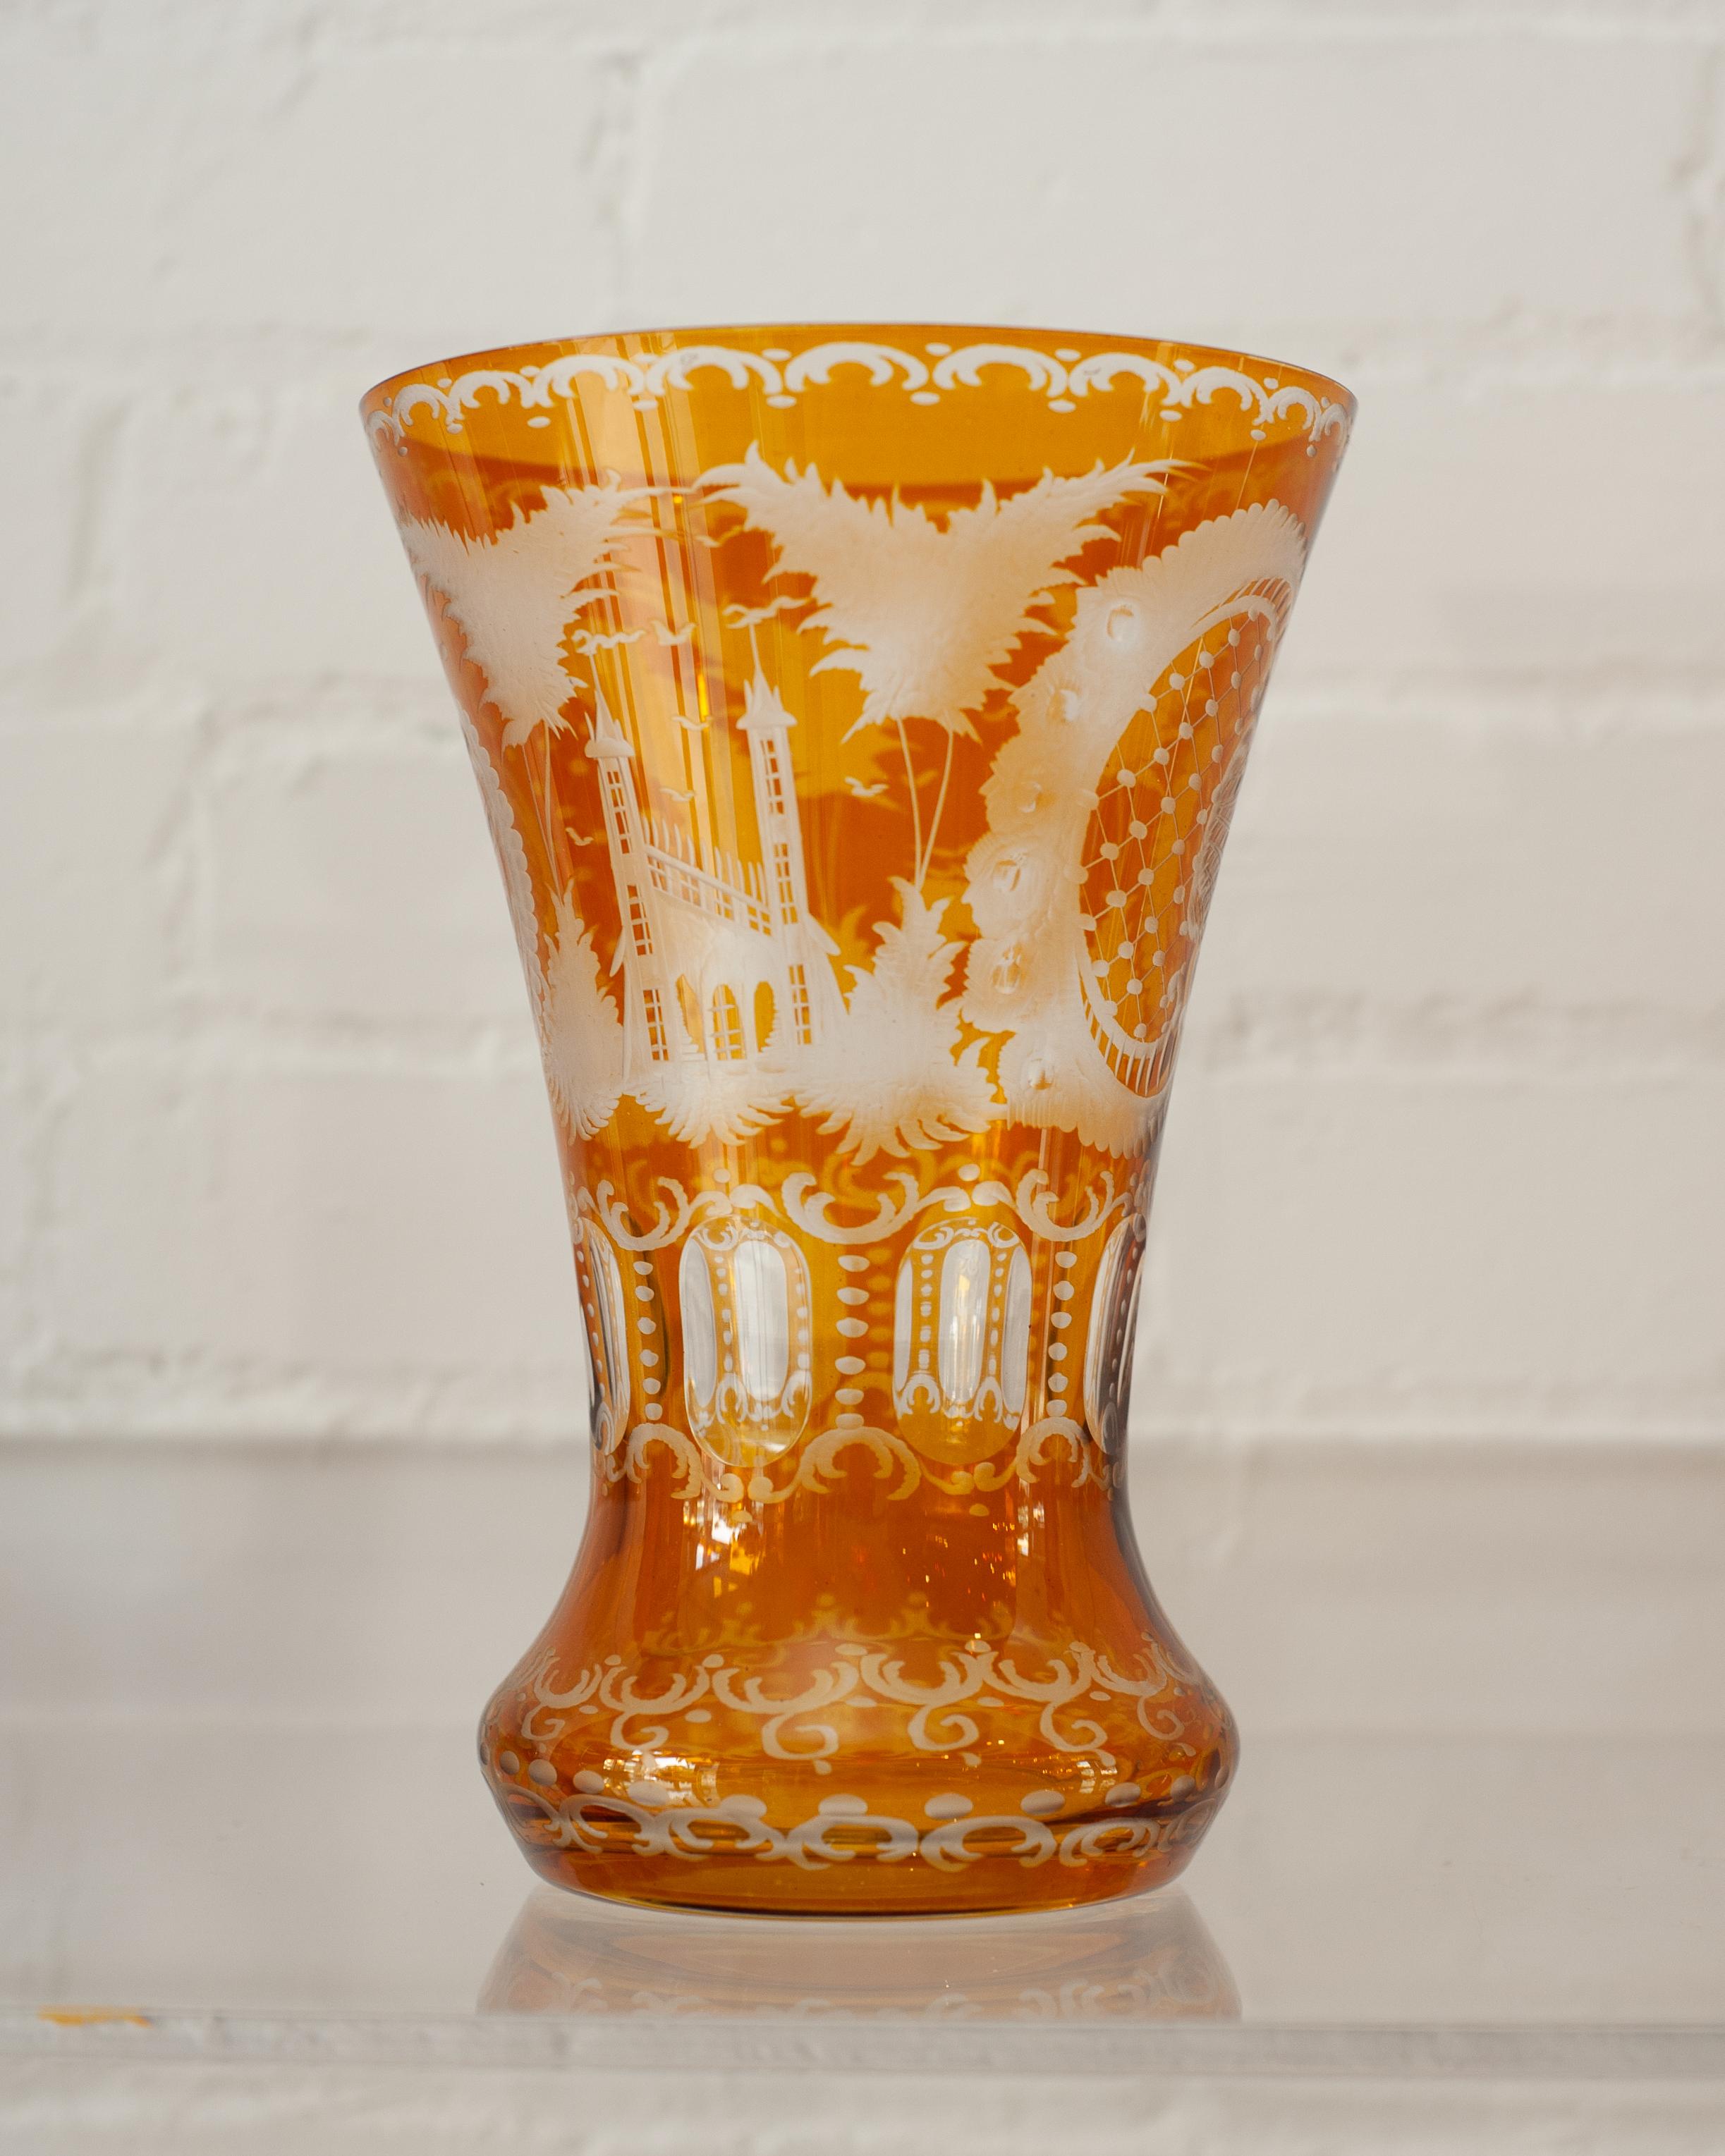 A large flared antique Bohemian amber glass vase with cut crystal ornate floral and cross hatch patterns. The artistry of the cut crystal makes this vessel as beautiful as the flowers you may put in them.